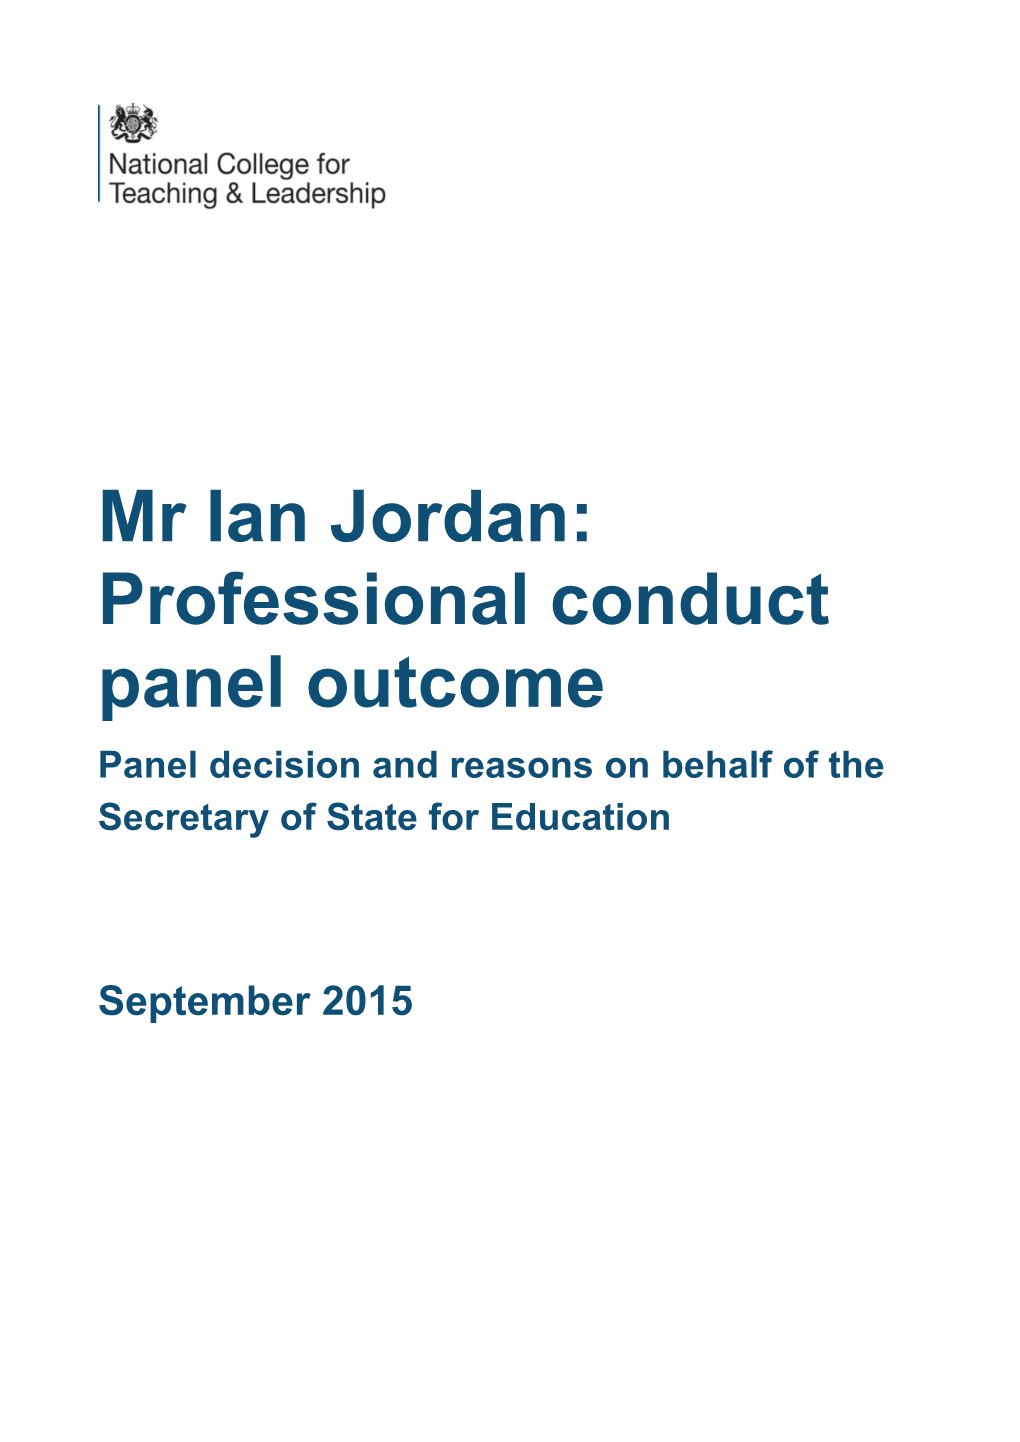 Mr Ian Jordan: Professional Conduct Panel Outcome Panel Decision and Reasons on Behalf of the Secretary of State for Education